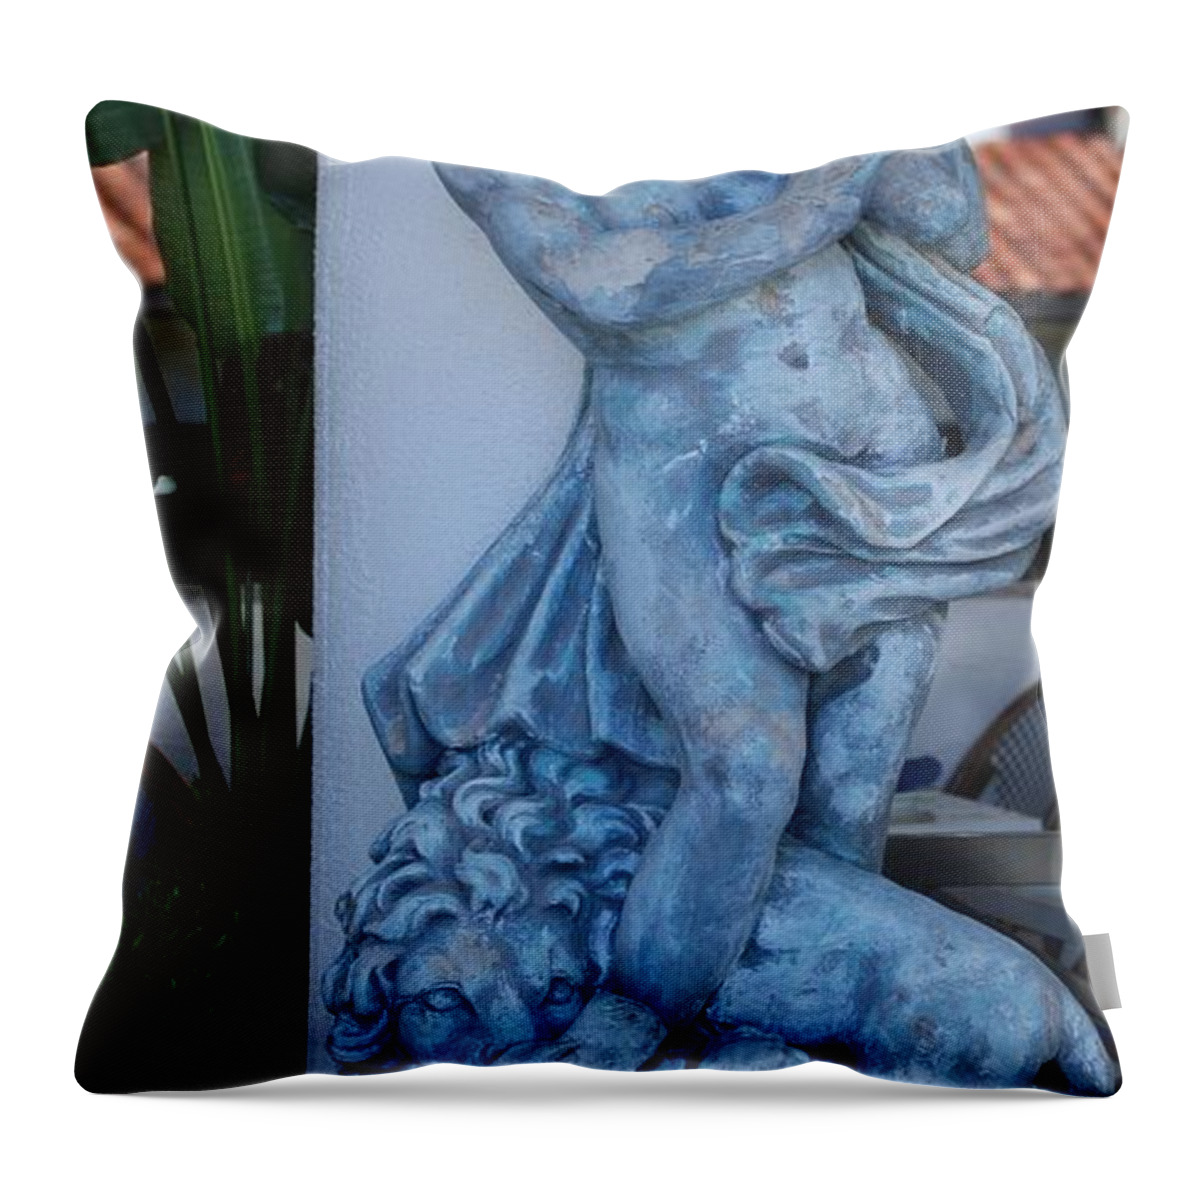 Statue Throw Pillow featuring the photograph Greek Dude And Lion In Blue by Rob Hans